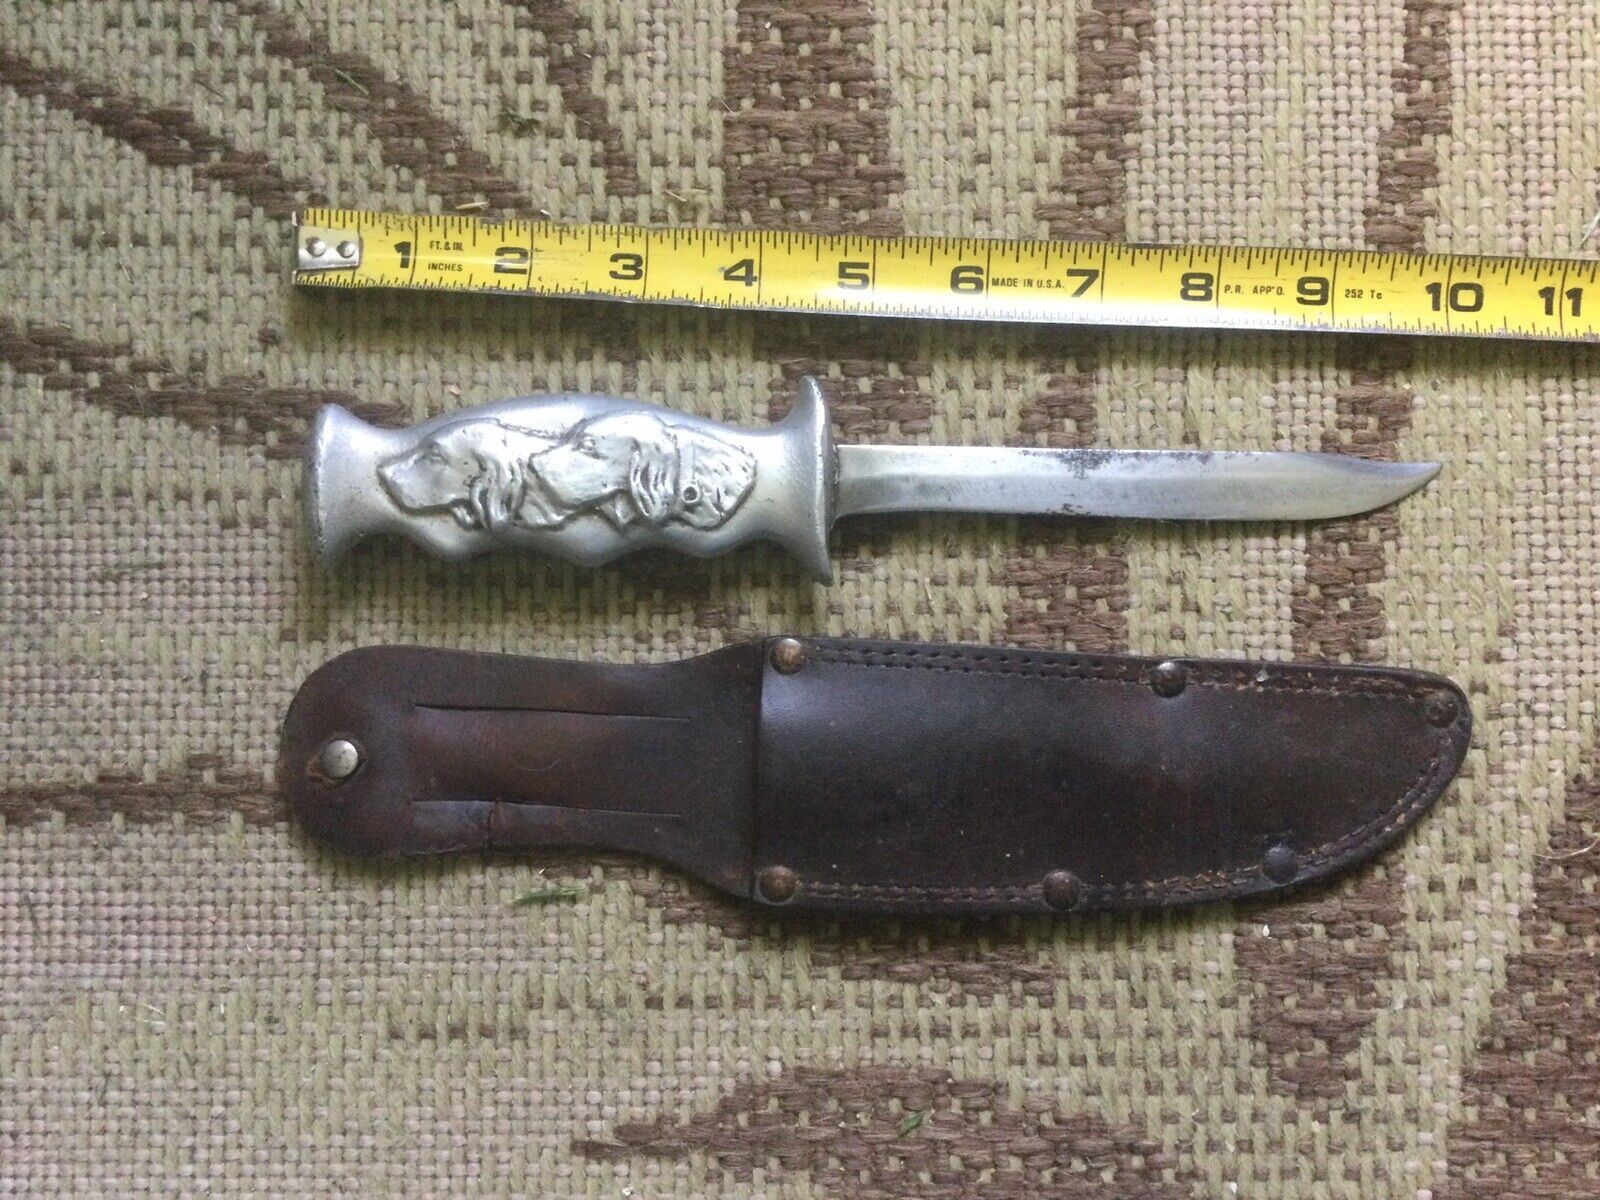 WW2 Milpar Two Dogs Combat Fighting Knife With Sheath Aluminum Handle 